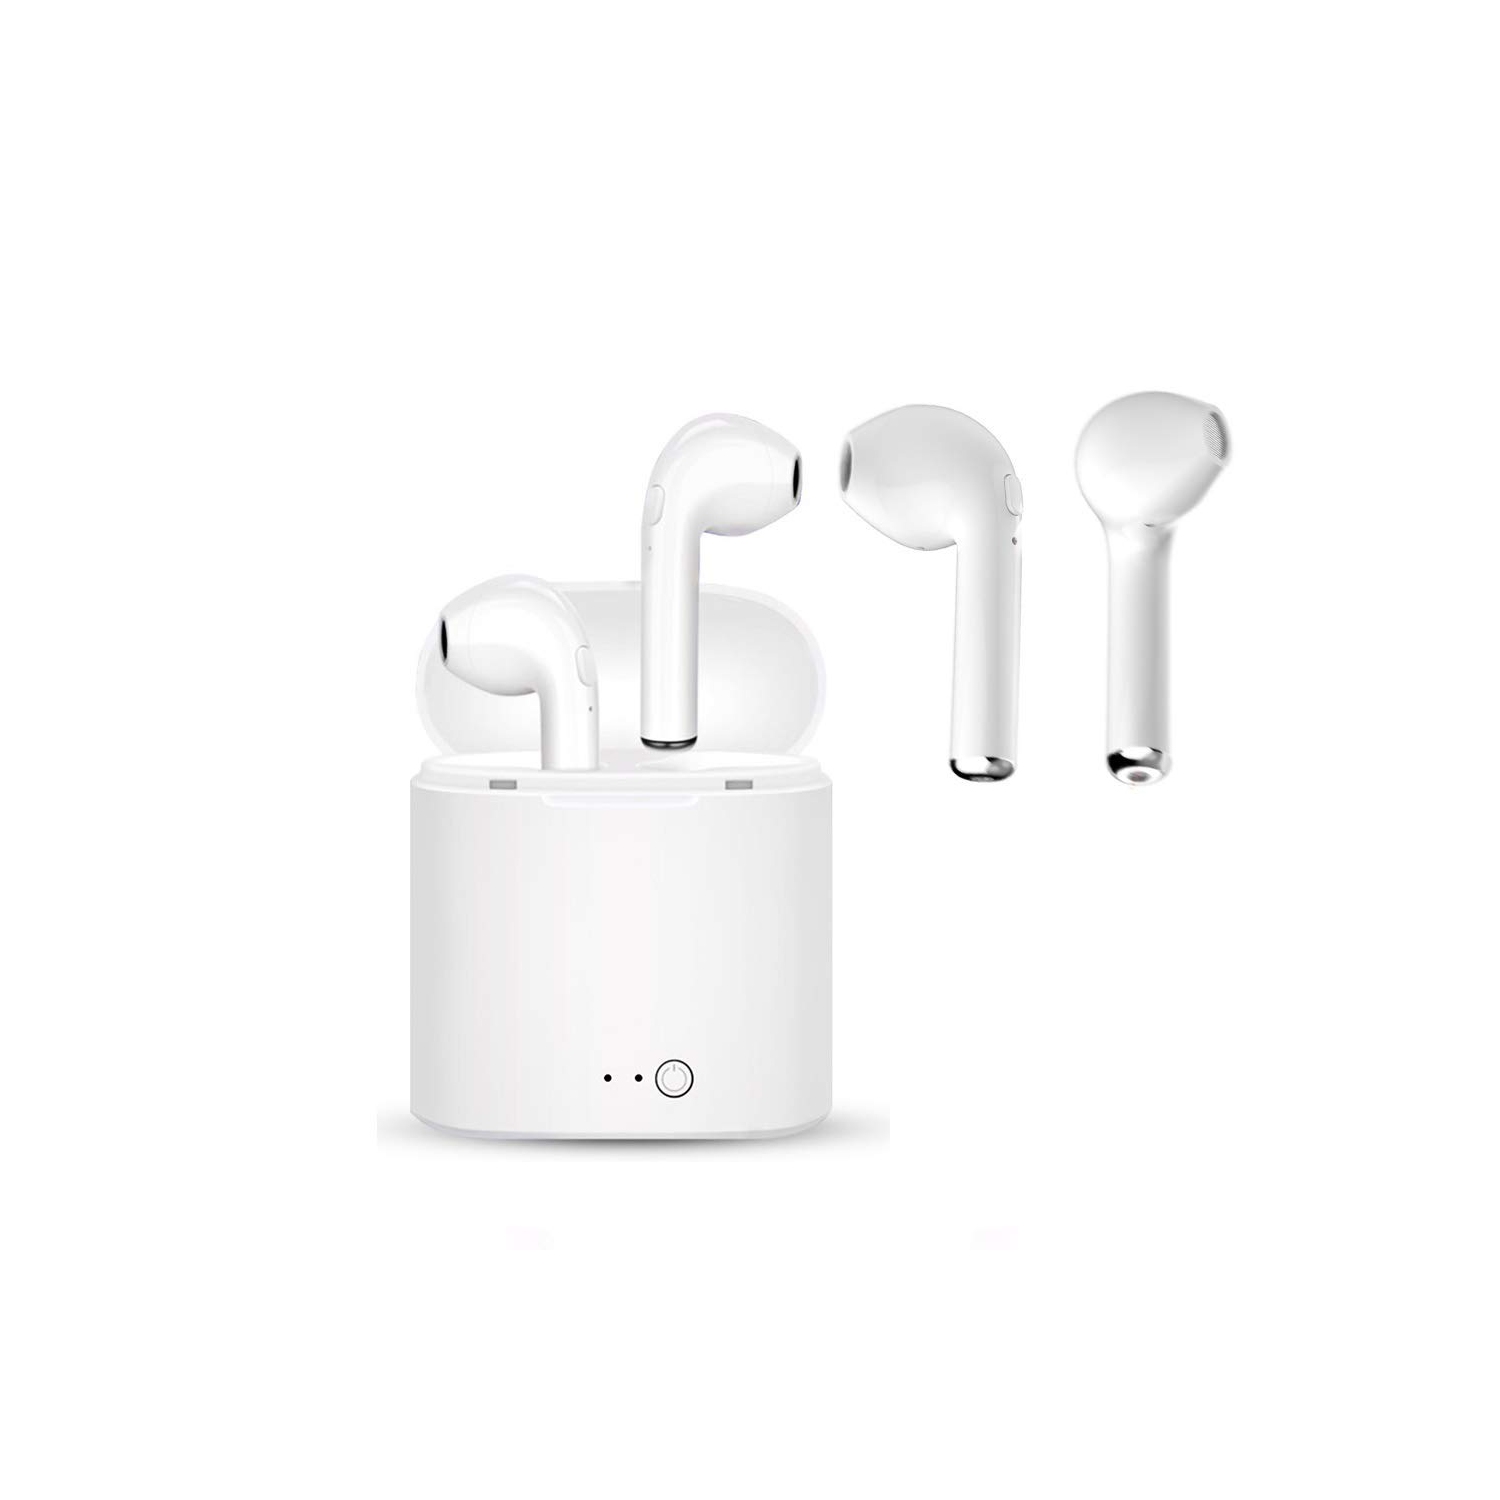 Bluetooth Headset,i7 Wireless Earbuds with Charging Case Mini in-Ear Headphones Earphone with Mic, Hands Free for iPhone X 8 8